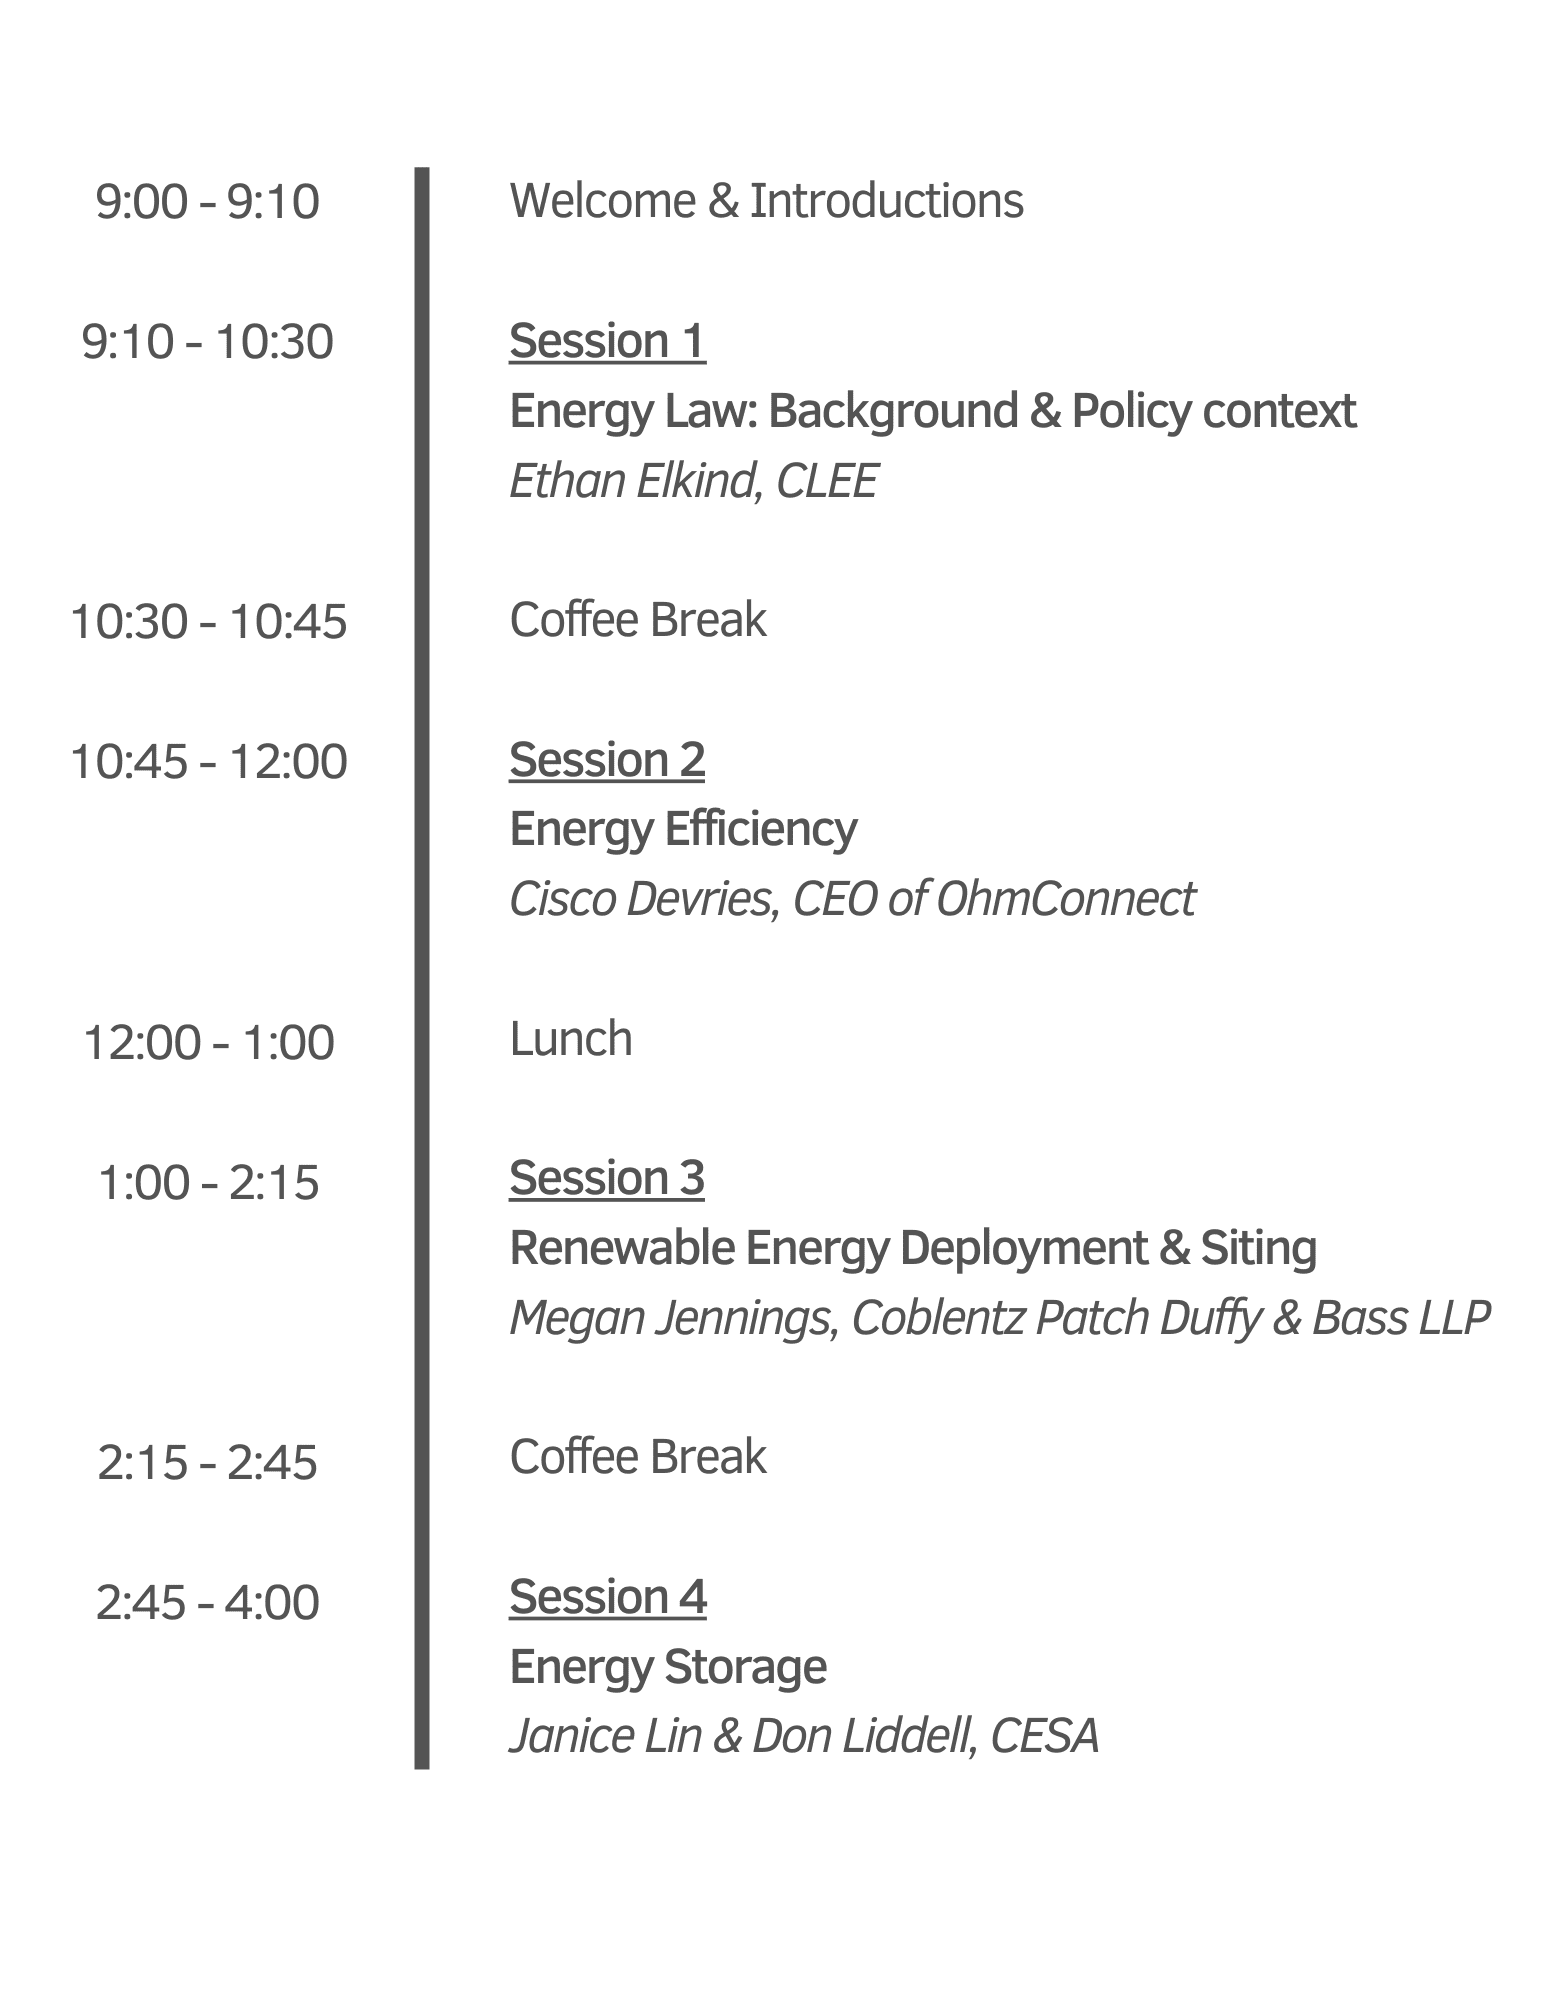 The schedule for Day 1 of the Symposium